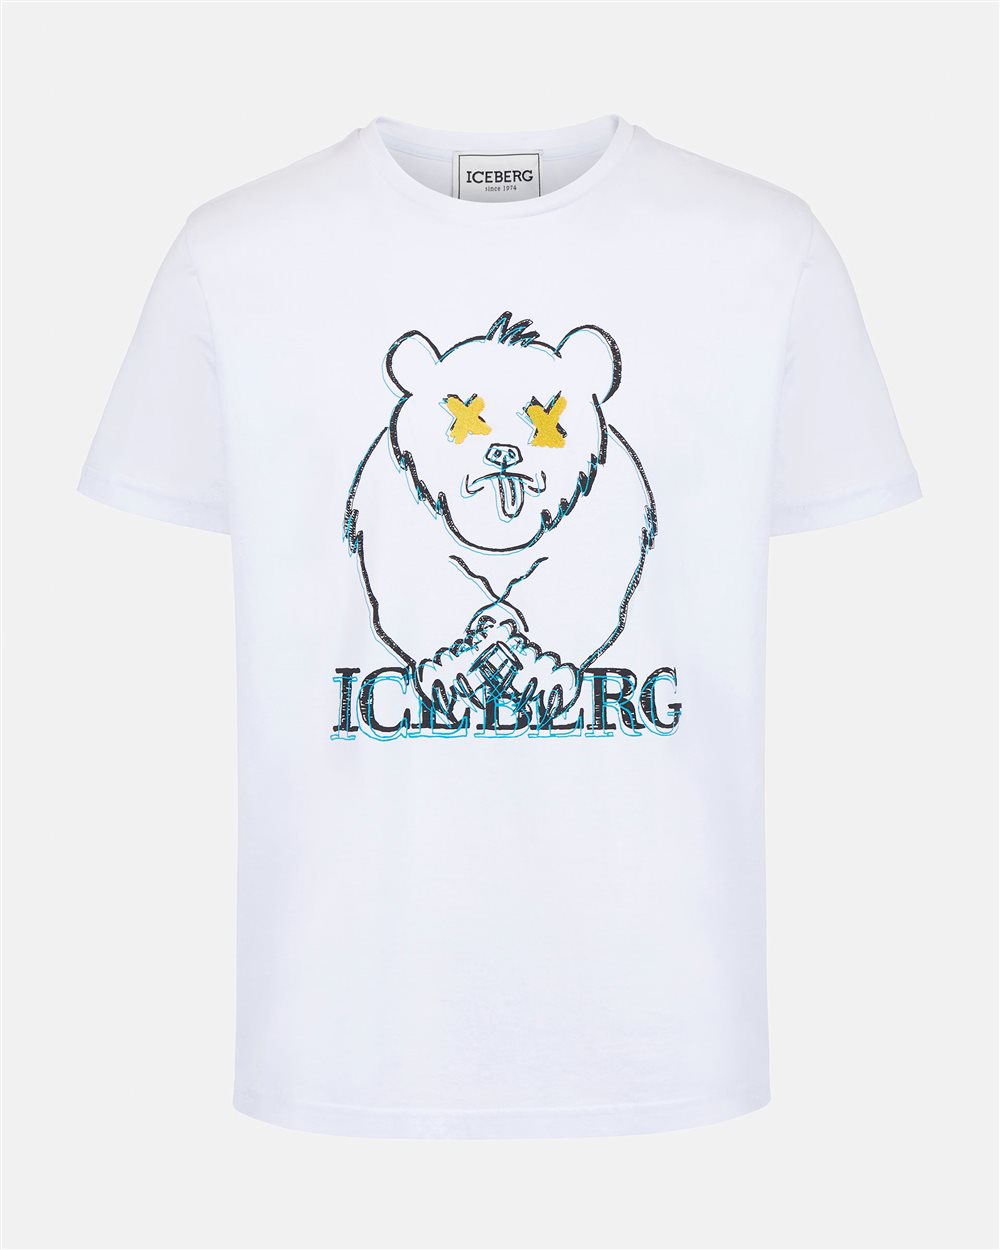 T-shirt with cartoon graphics and logo - Iceberg - Official Website